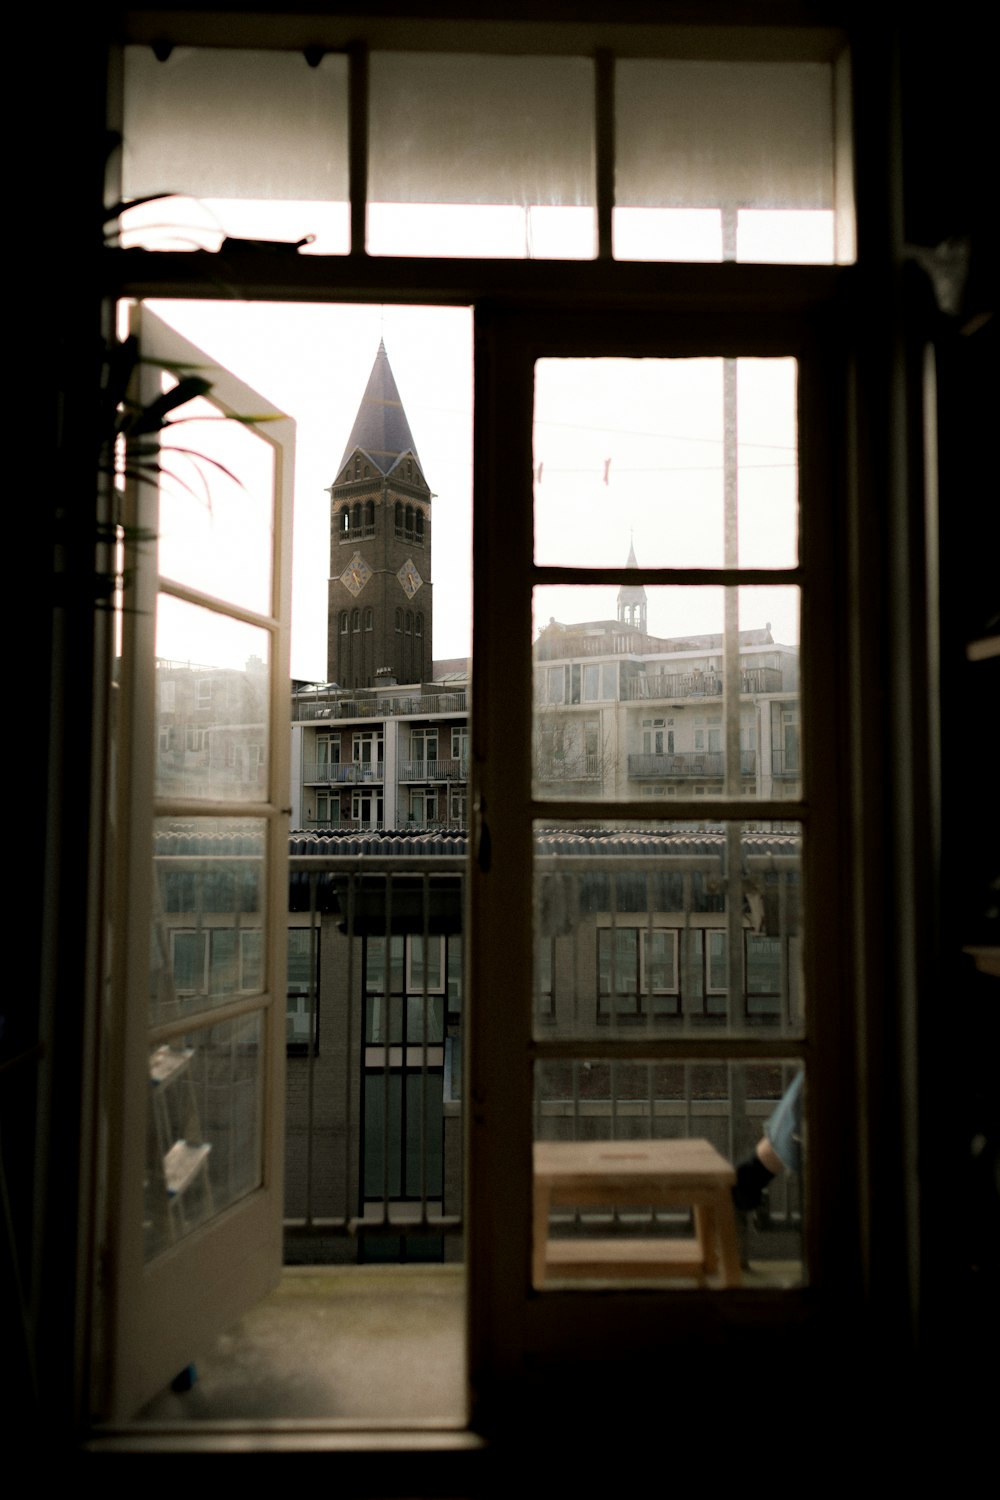 a view of a clock tower through a window